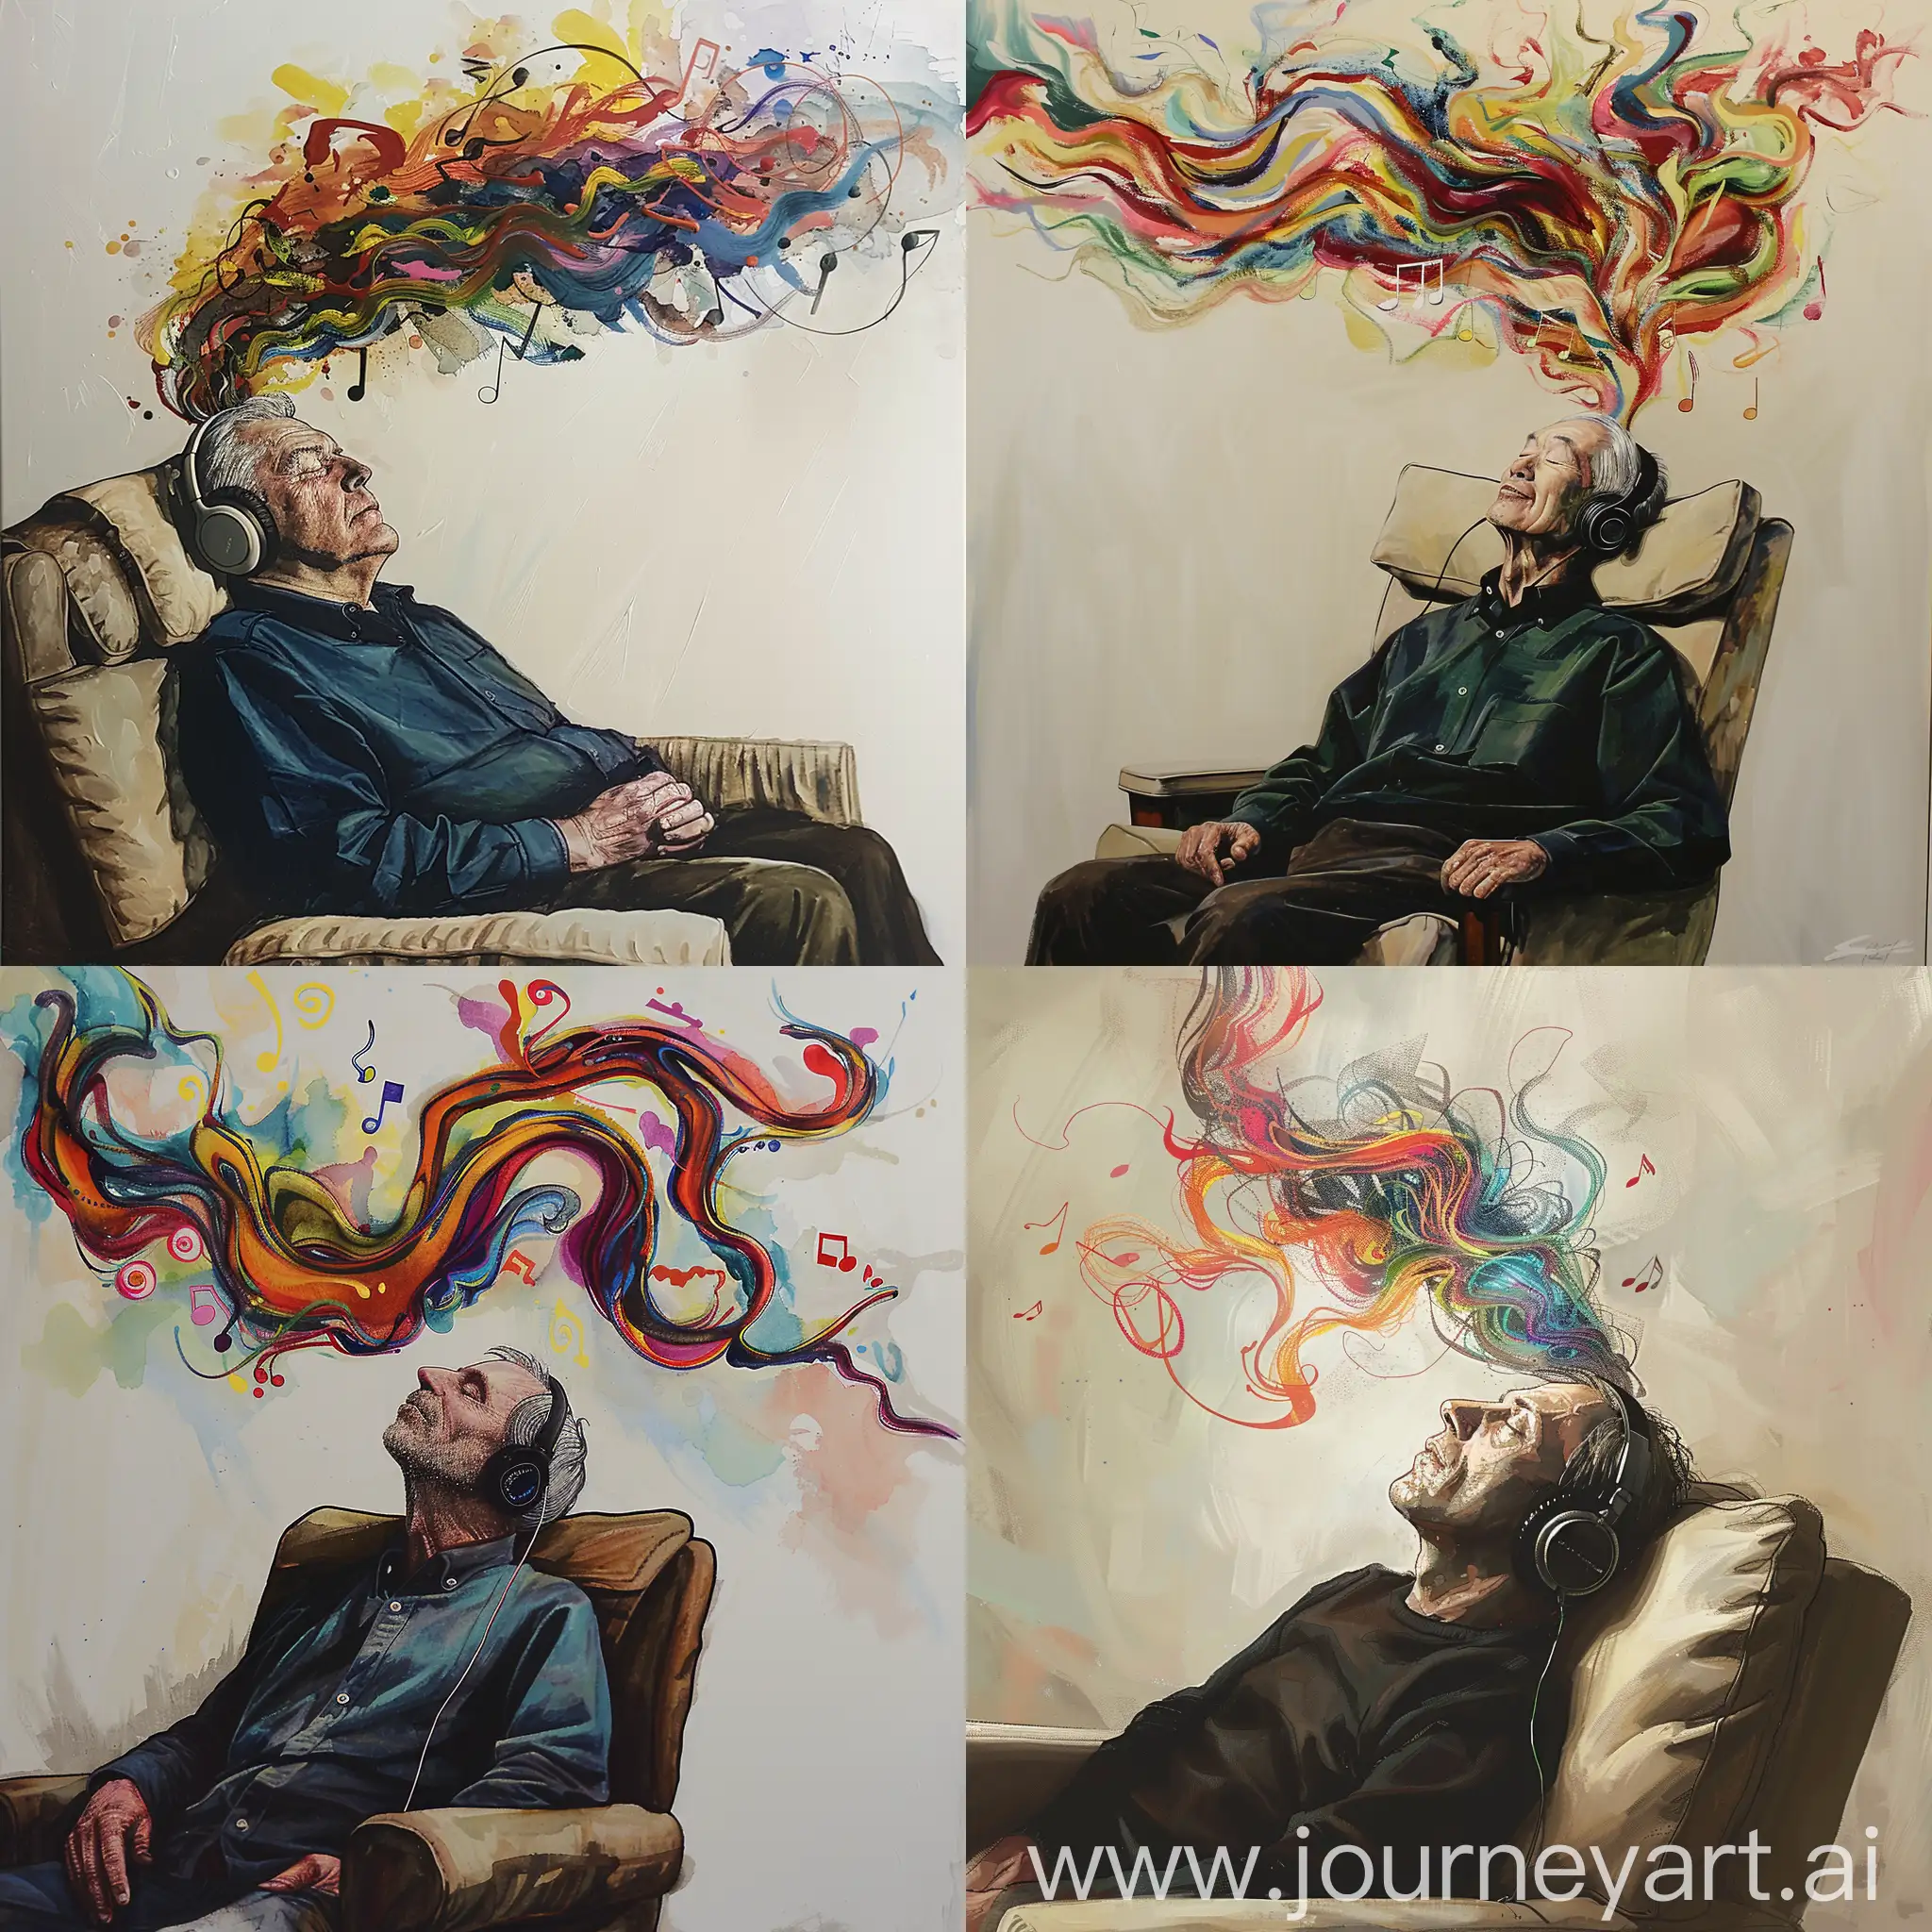 colored stroke painting of a middle-aged man, sitting in a sofa chair, head lying on the head support, eyes closed, headphones around ears. Above him, the melody is flowing with colors, notes, and sounds.